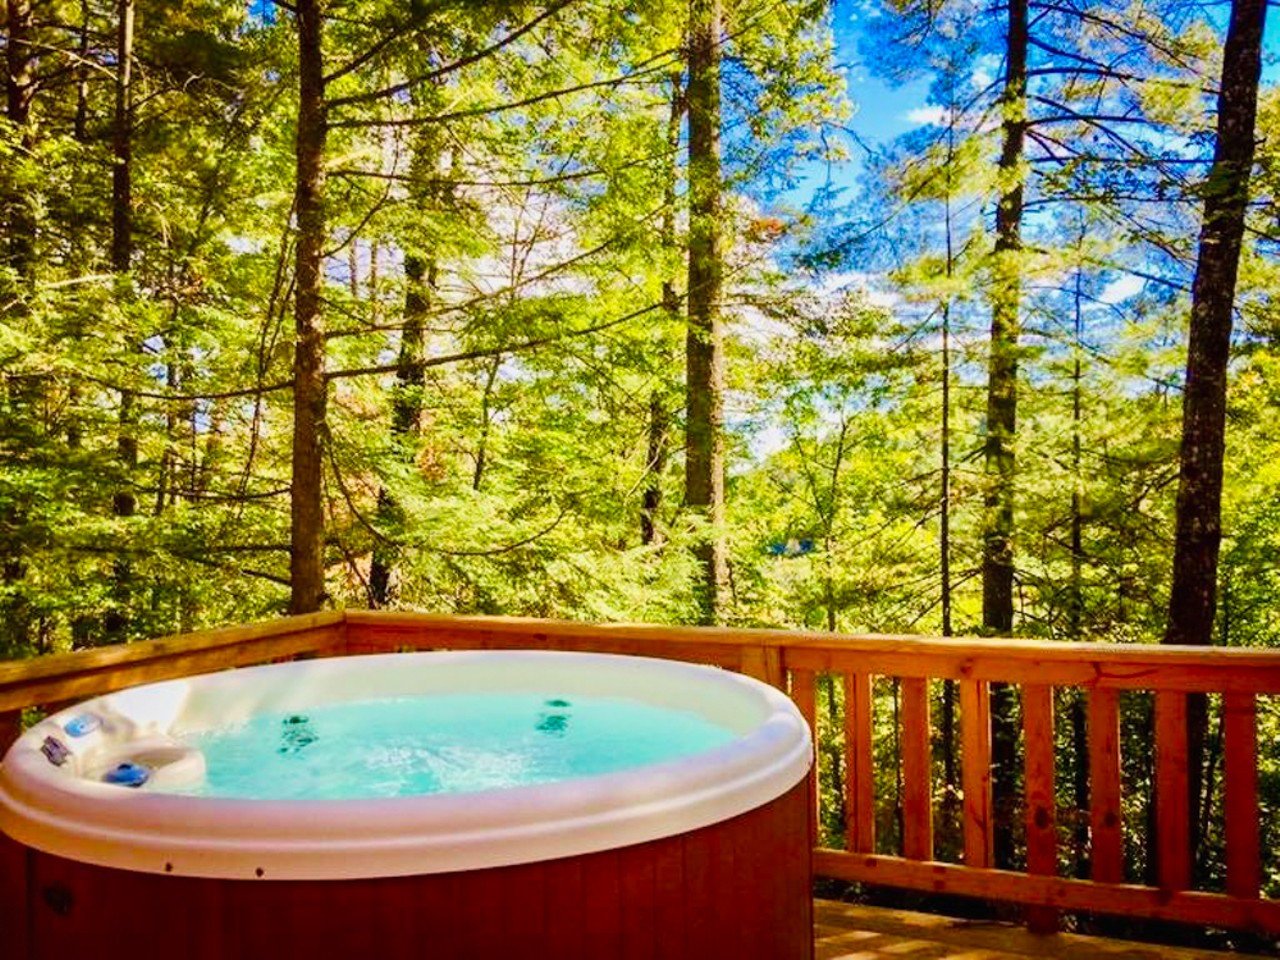 Lets Get CozyRRG, hot tub, wifi, no clean/pet fee!
Entire Cabin | Starting at $161/night | Hosts 2 Guests 
&#147;Welcome to your private relaxing getaway tucked in the forest of the Red River Gorge! Conveniently located just minutes from all the hiking, climbing, activities, and restaurants that the gorge has to offer! Completely custom cabin offers a unique handmade staircase, bartop, private deck with hot tub in the tree canopy, and a fantastic outdoor firepit! Zero light pollution and the sounds of nature are sure to relax the body and mind! Come make lasting memories in this fantastic cabin!&#148;